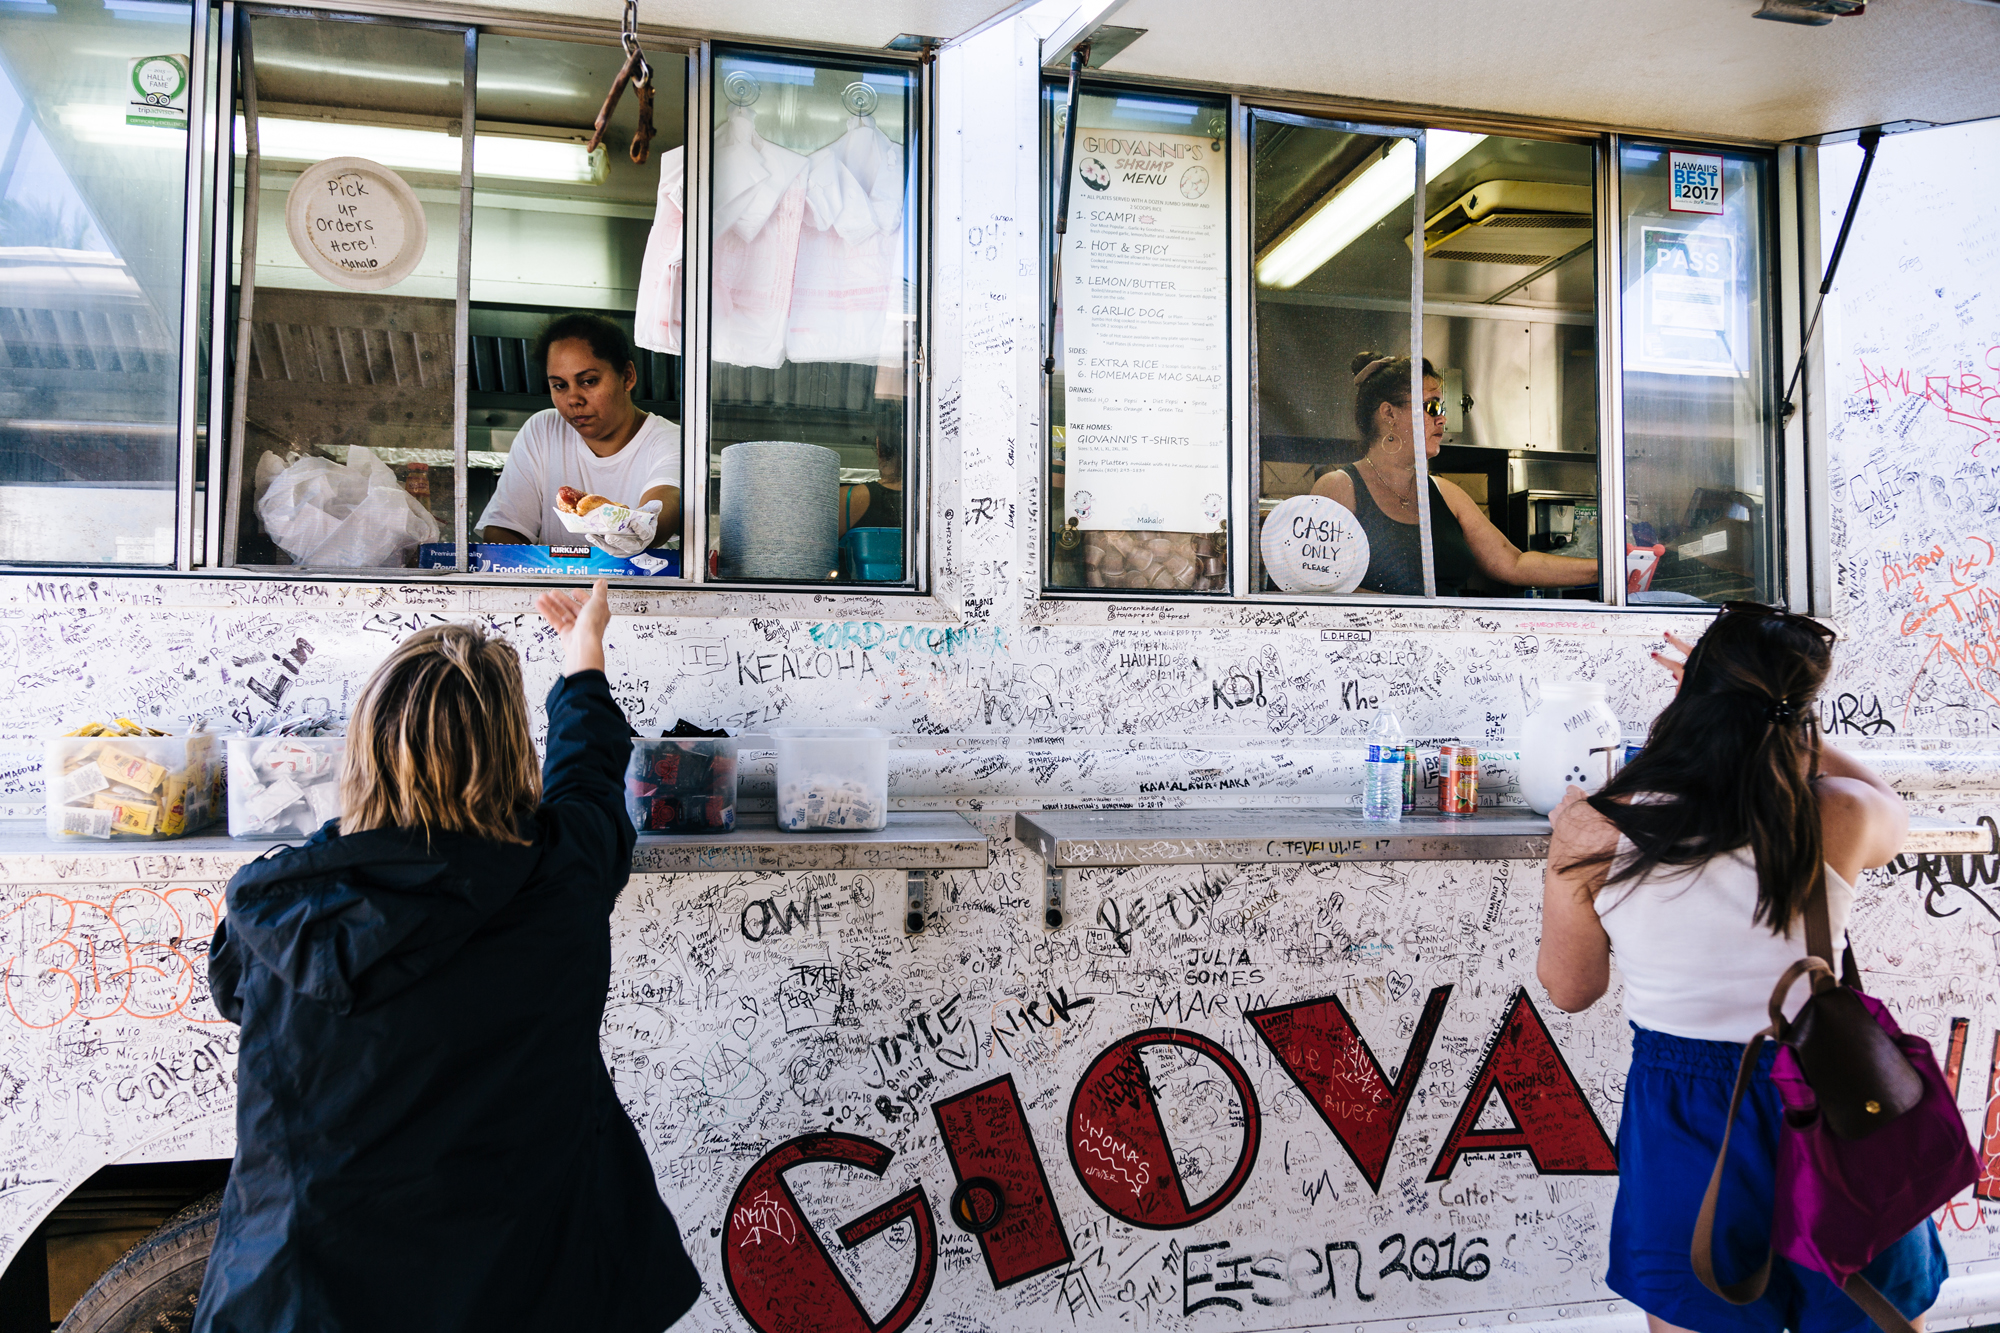 Giovanni’s shrimp truck feeds hundreds of hungry travellers every lunchtime